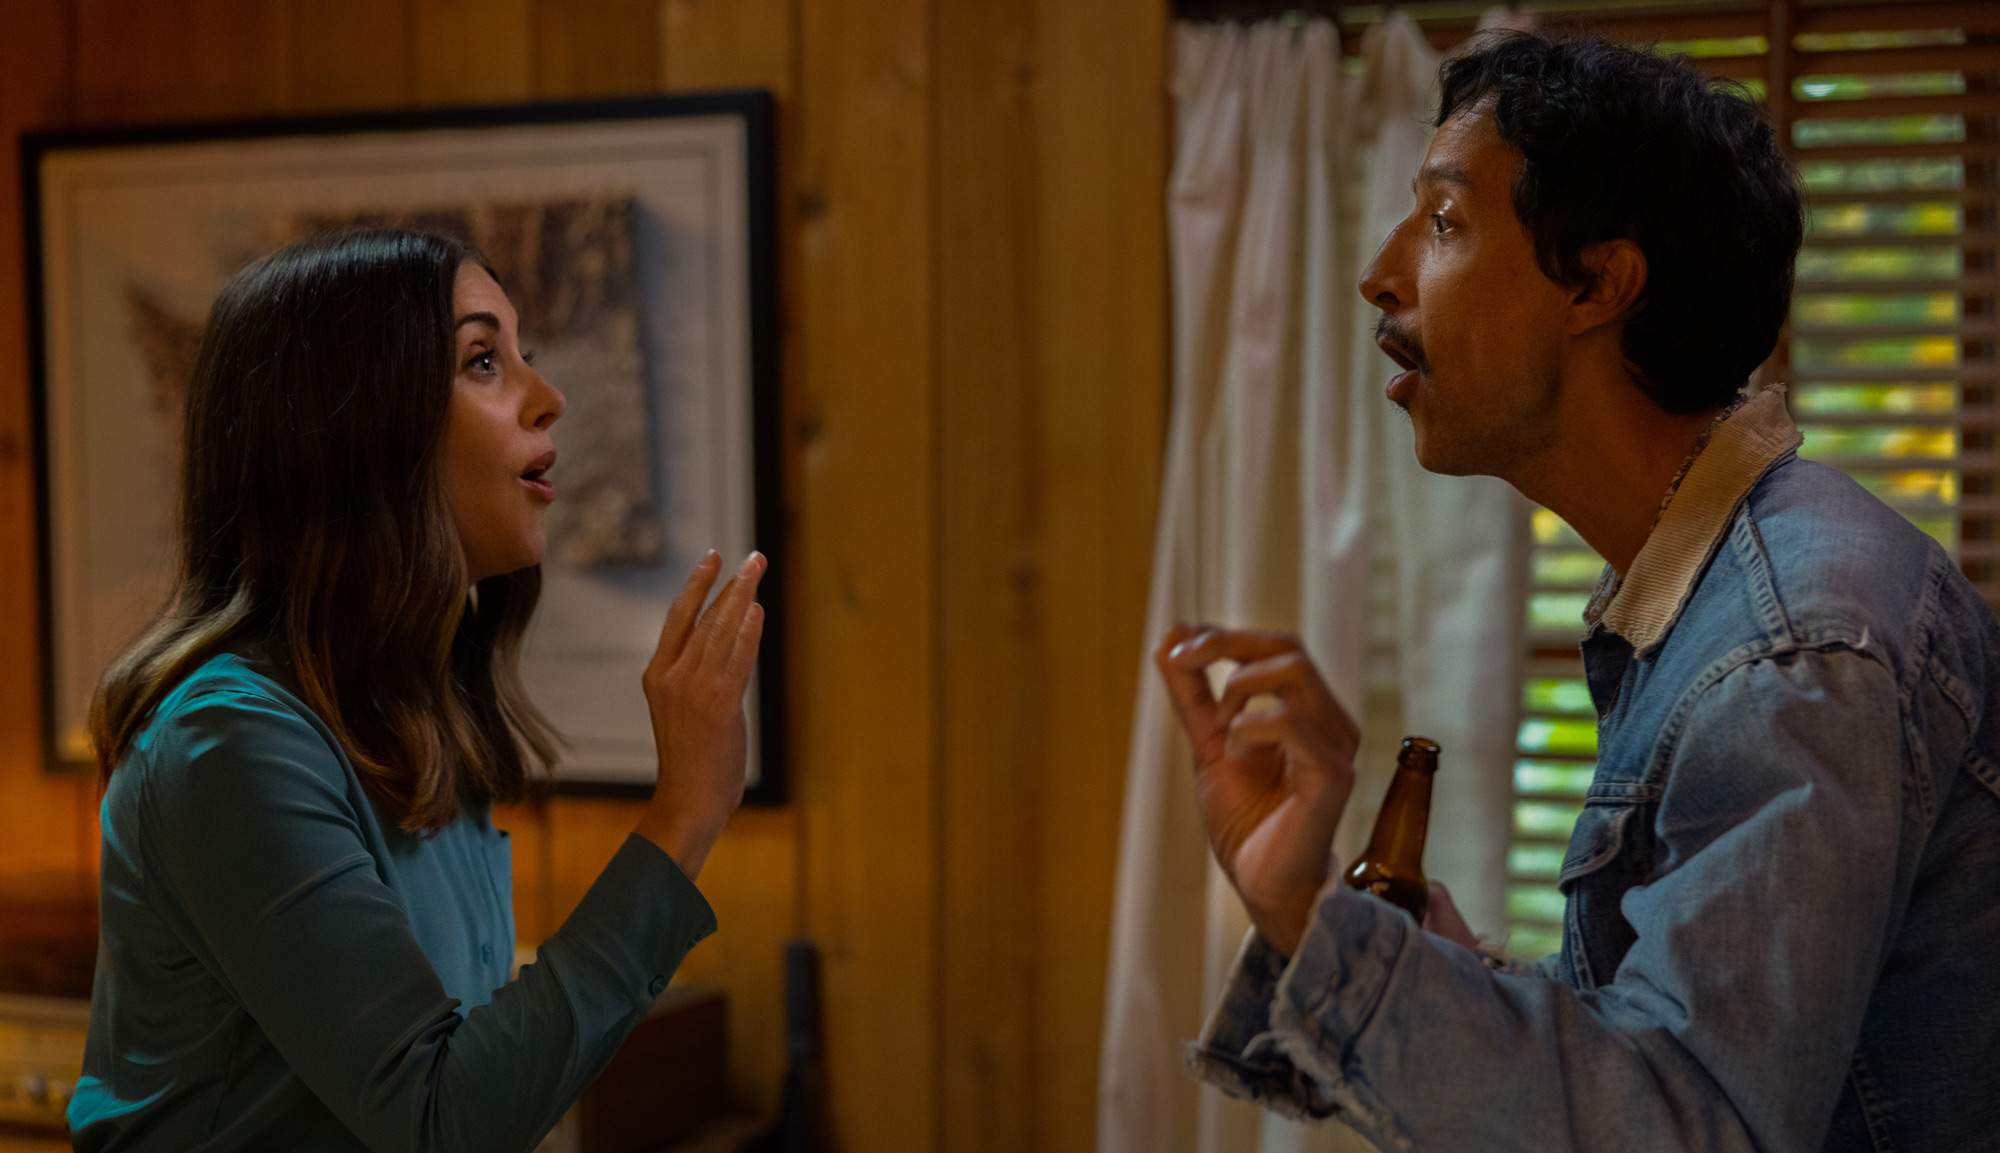 Alison Brie and Danny Pudi in "Somebody I Used to Know"